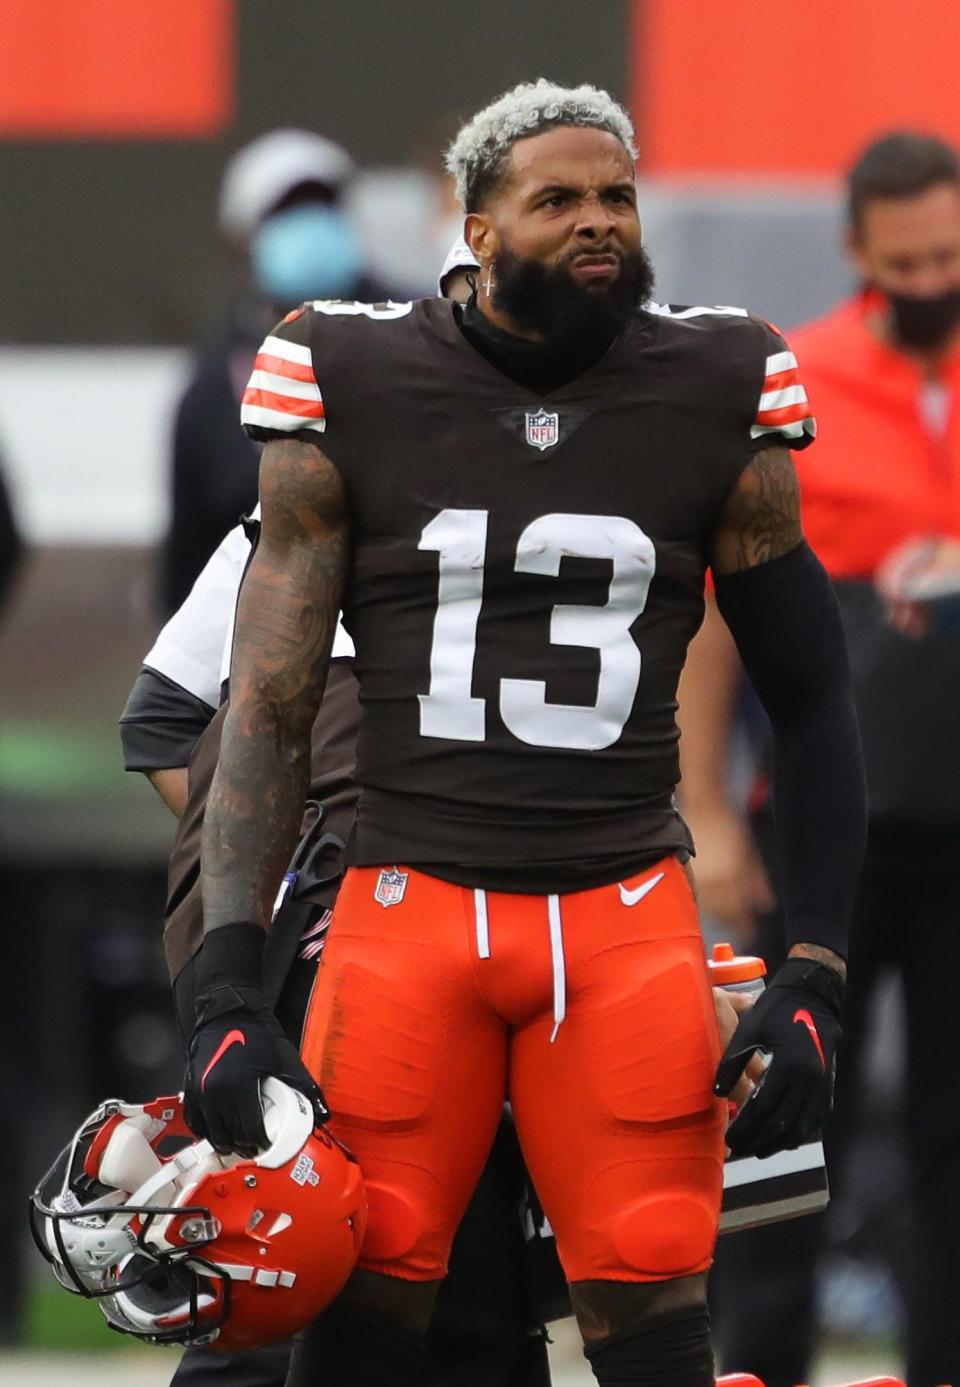 Cleveland Browns wide receiver Odell Beckham Jr. (13) reacts as he watches a replay of his catch on the scoreboard during the second quarter of an NFL football game, Sunday, Oct. 11, 2020, in Cleveland, Ohio.